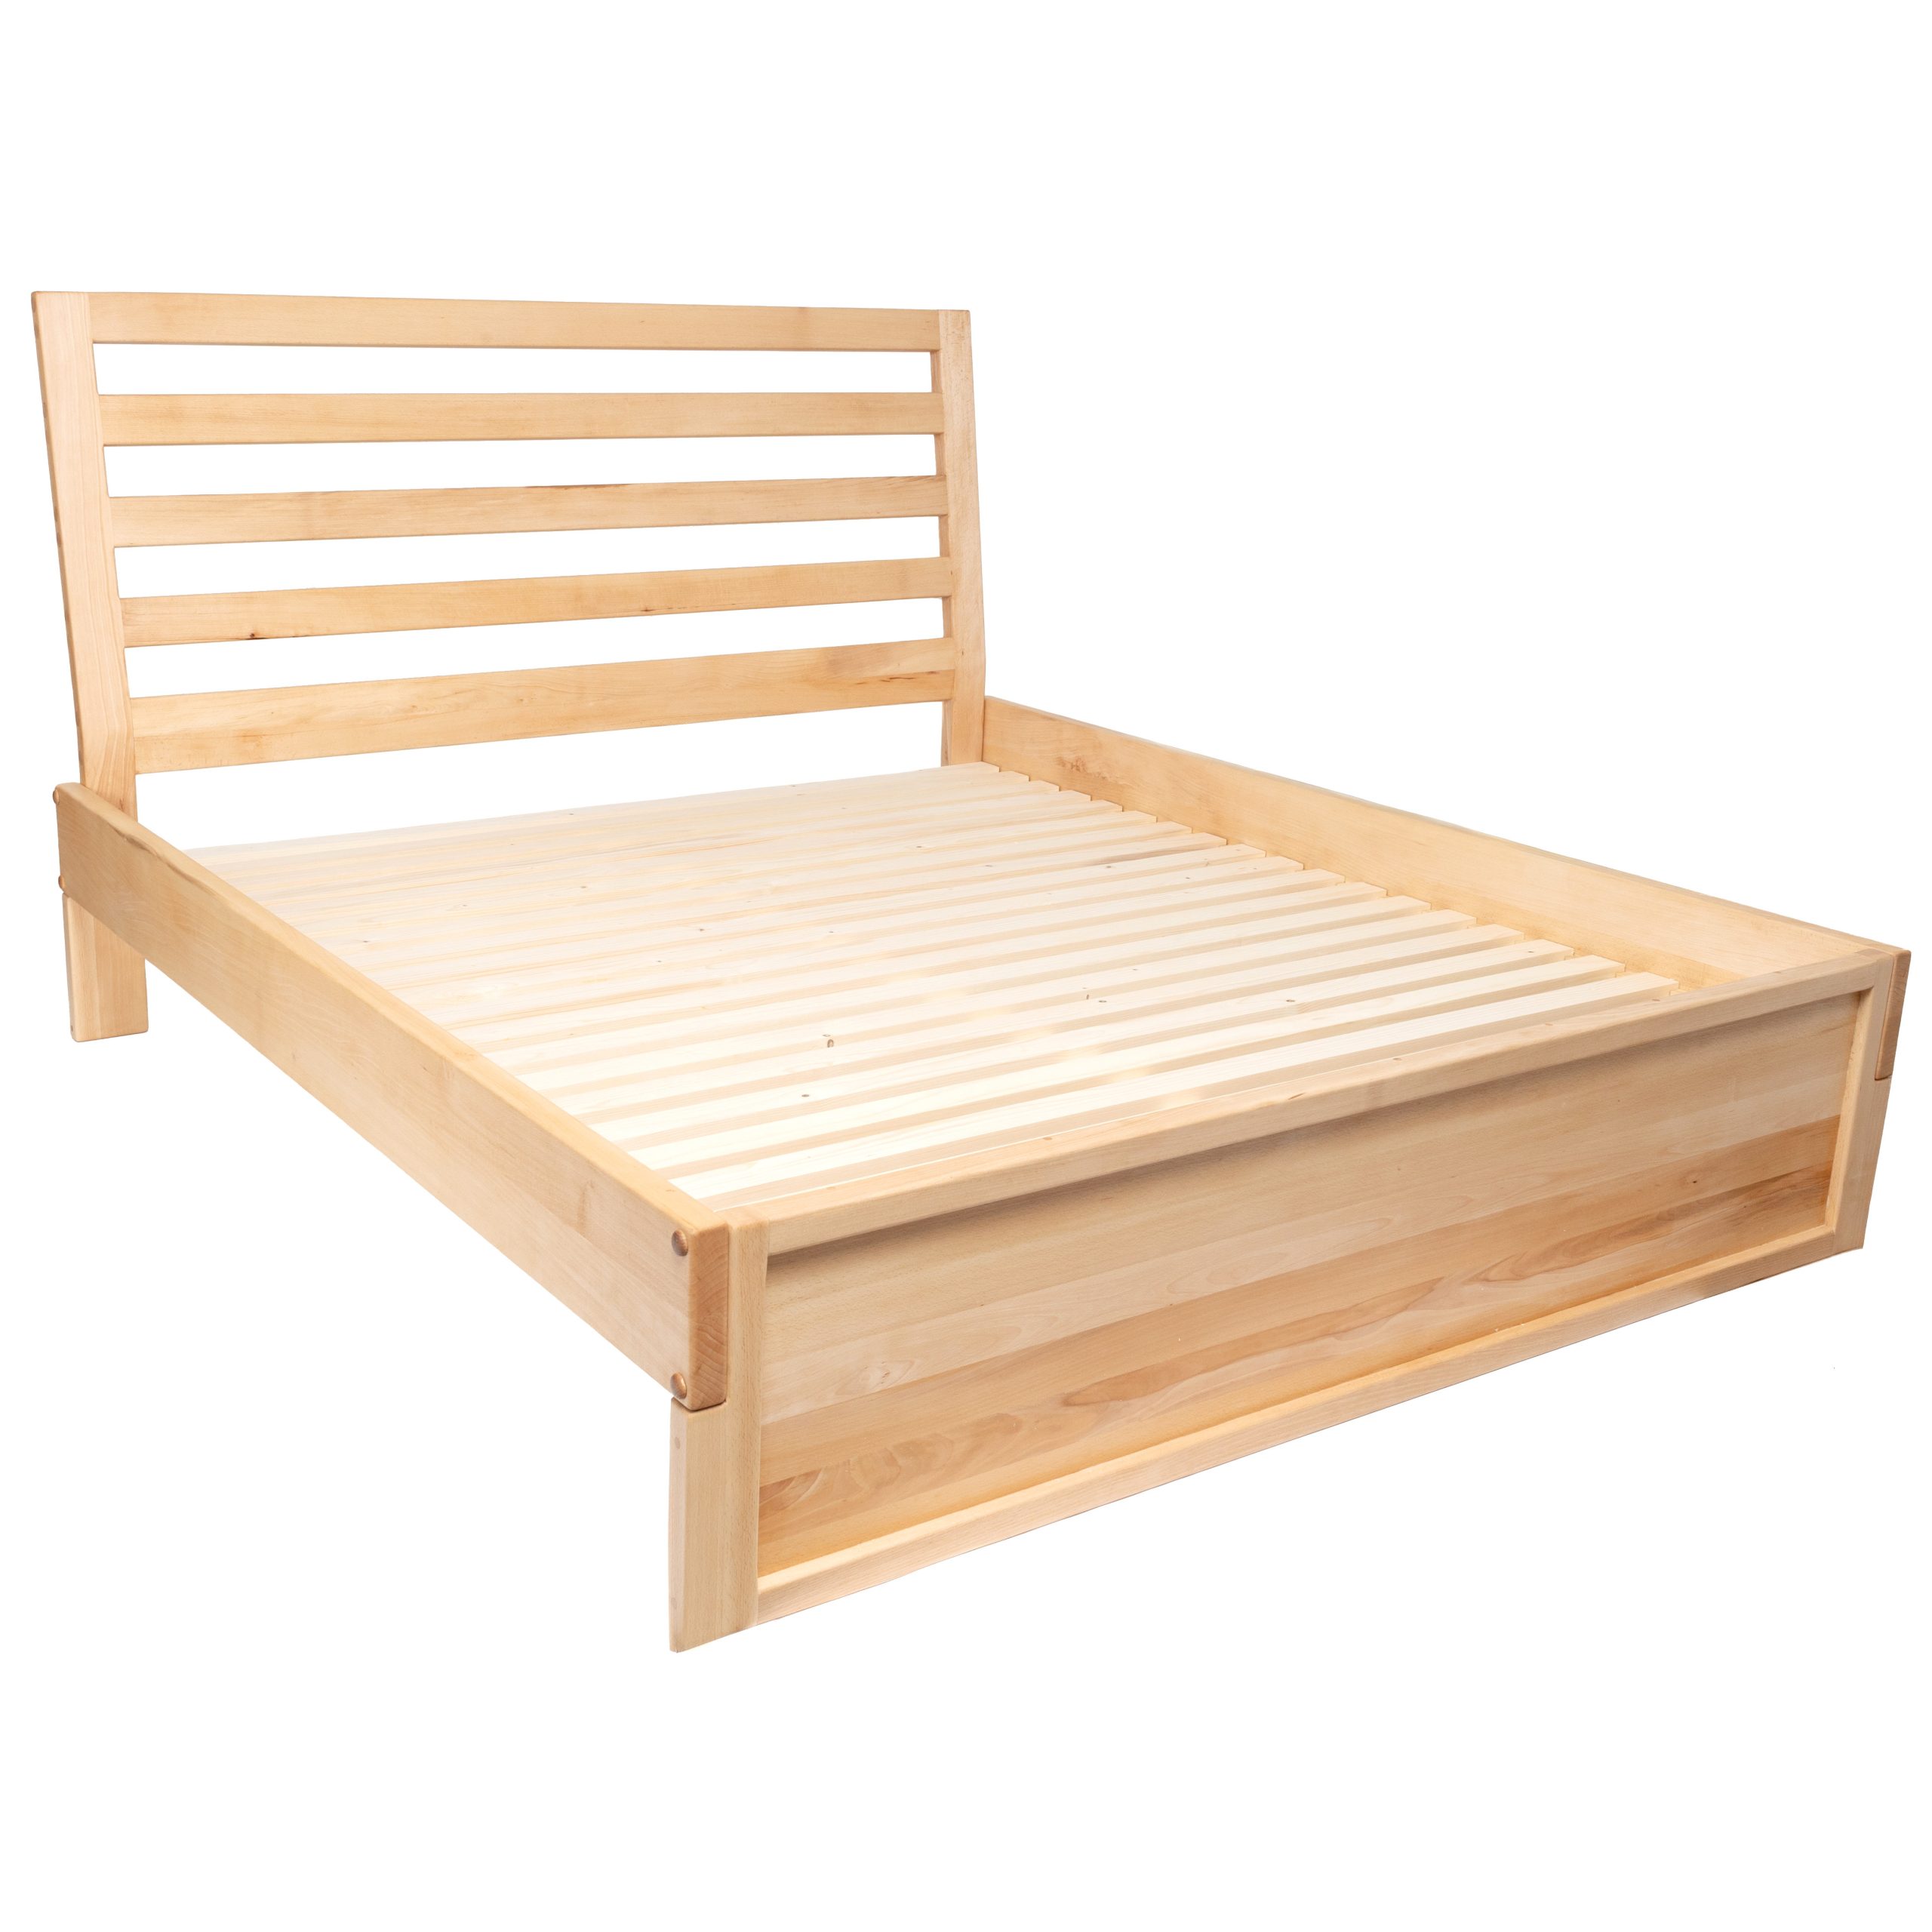 Double bed Kego